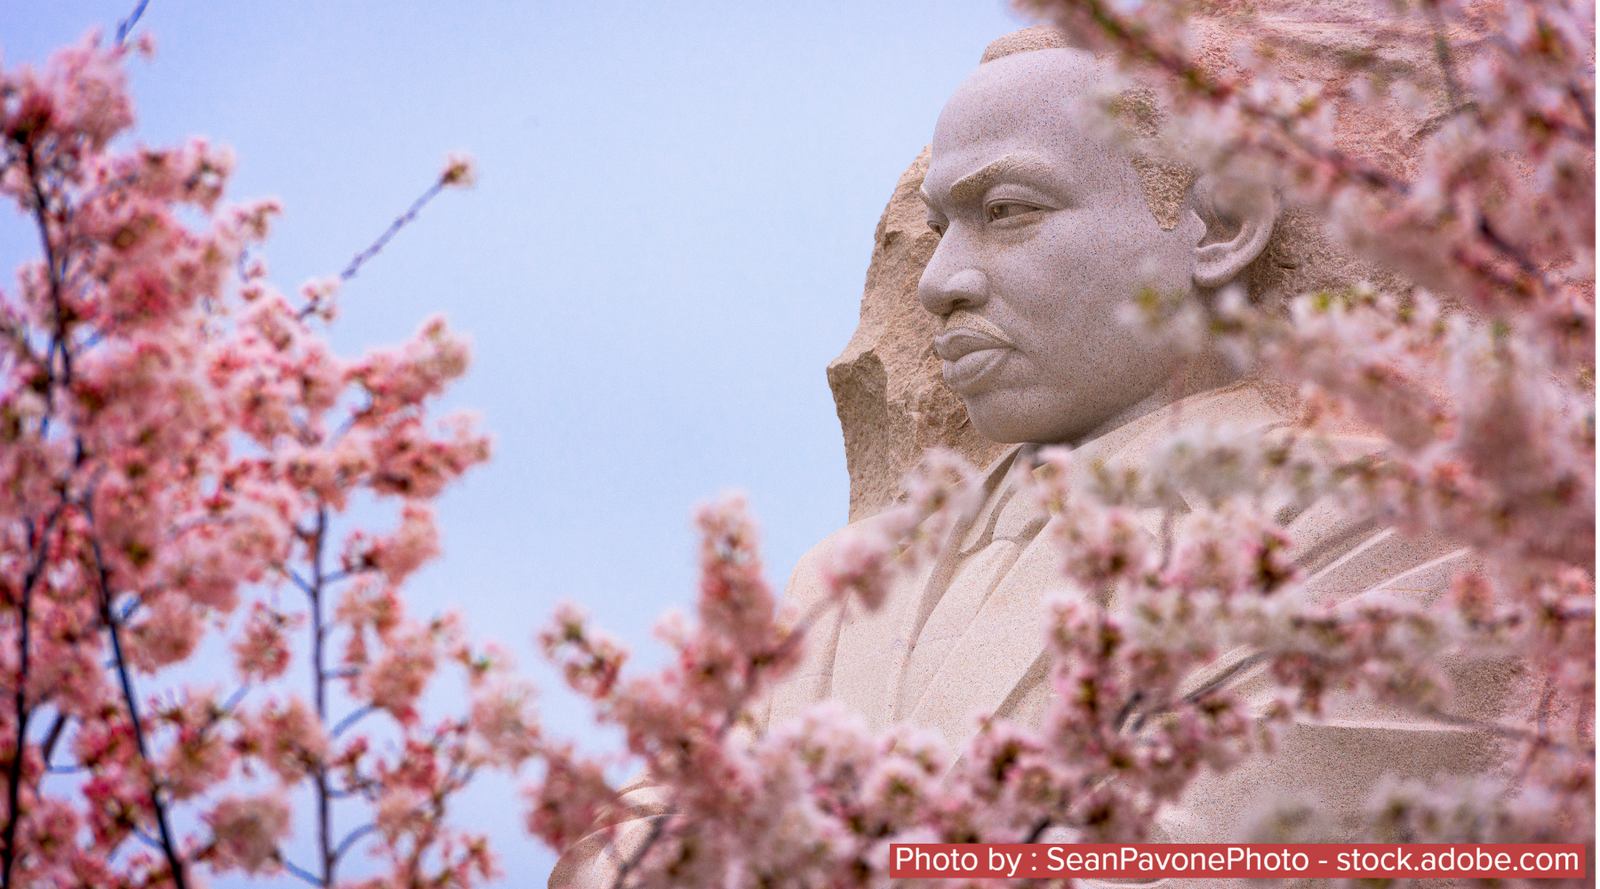 Celebrating MLK Day - How Social Justice Impacts Social Wellness